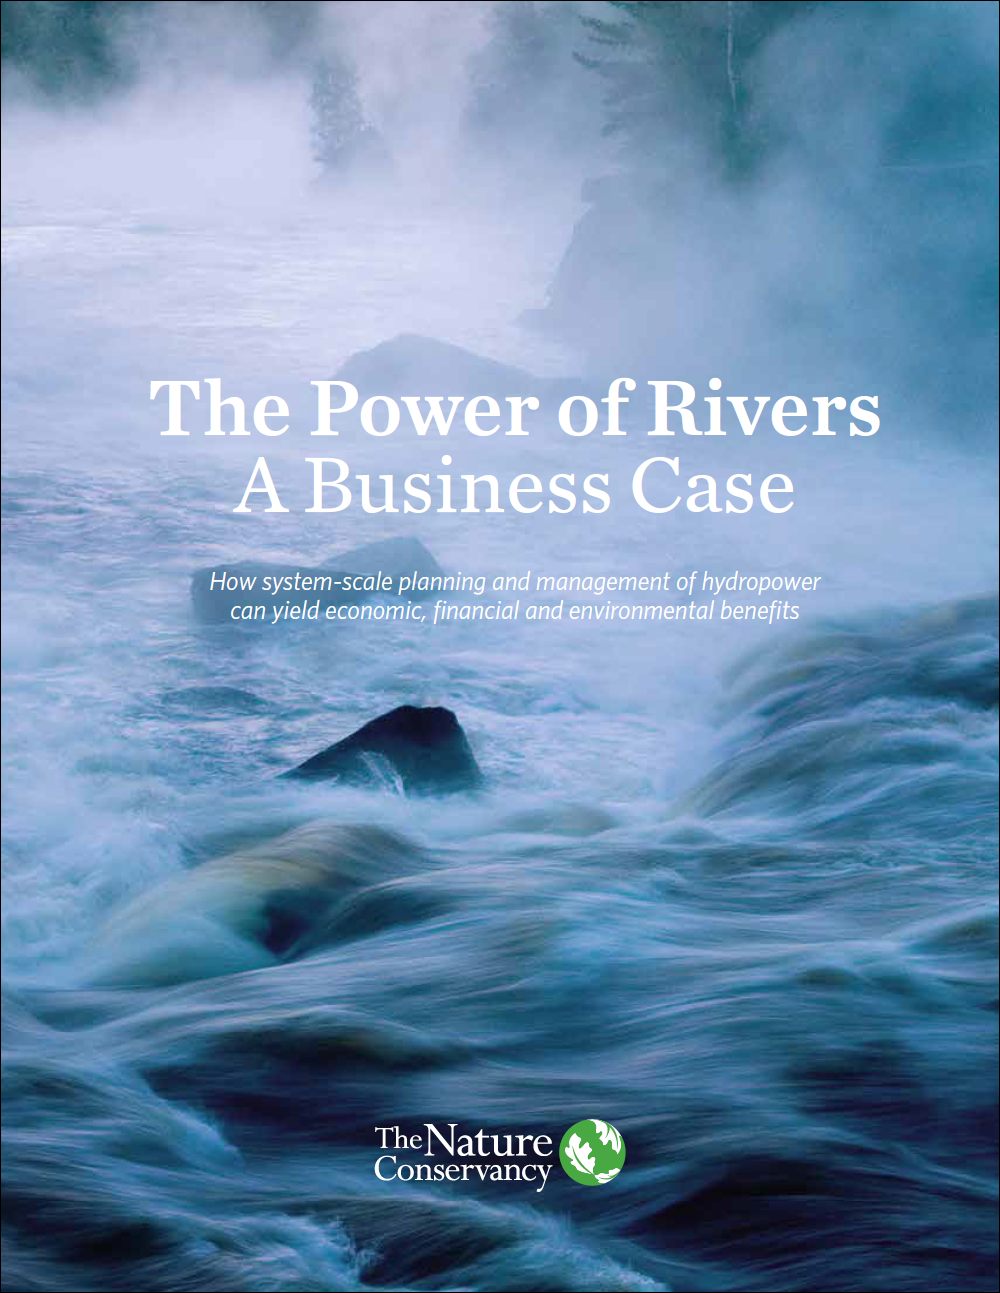 How system-scale planning and management of hydropower
can yield economic, financial and environmental benefits.